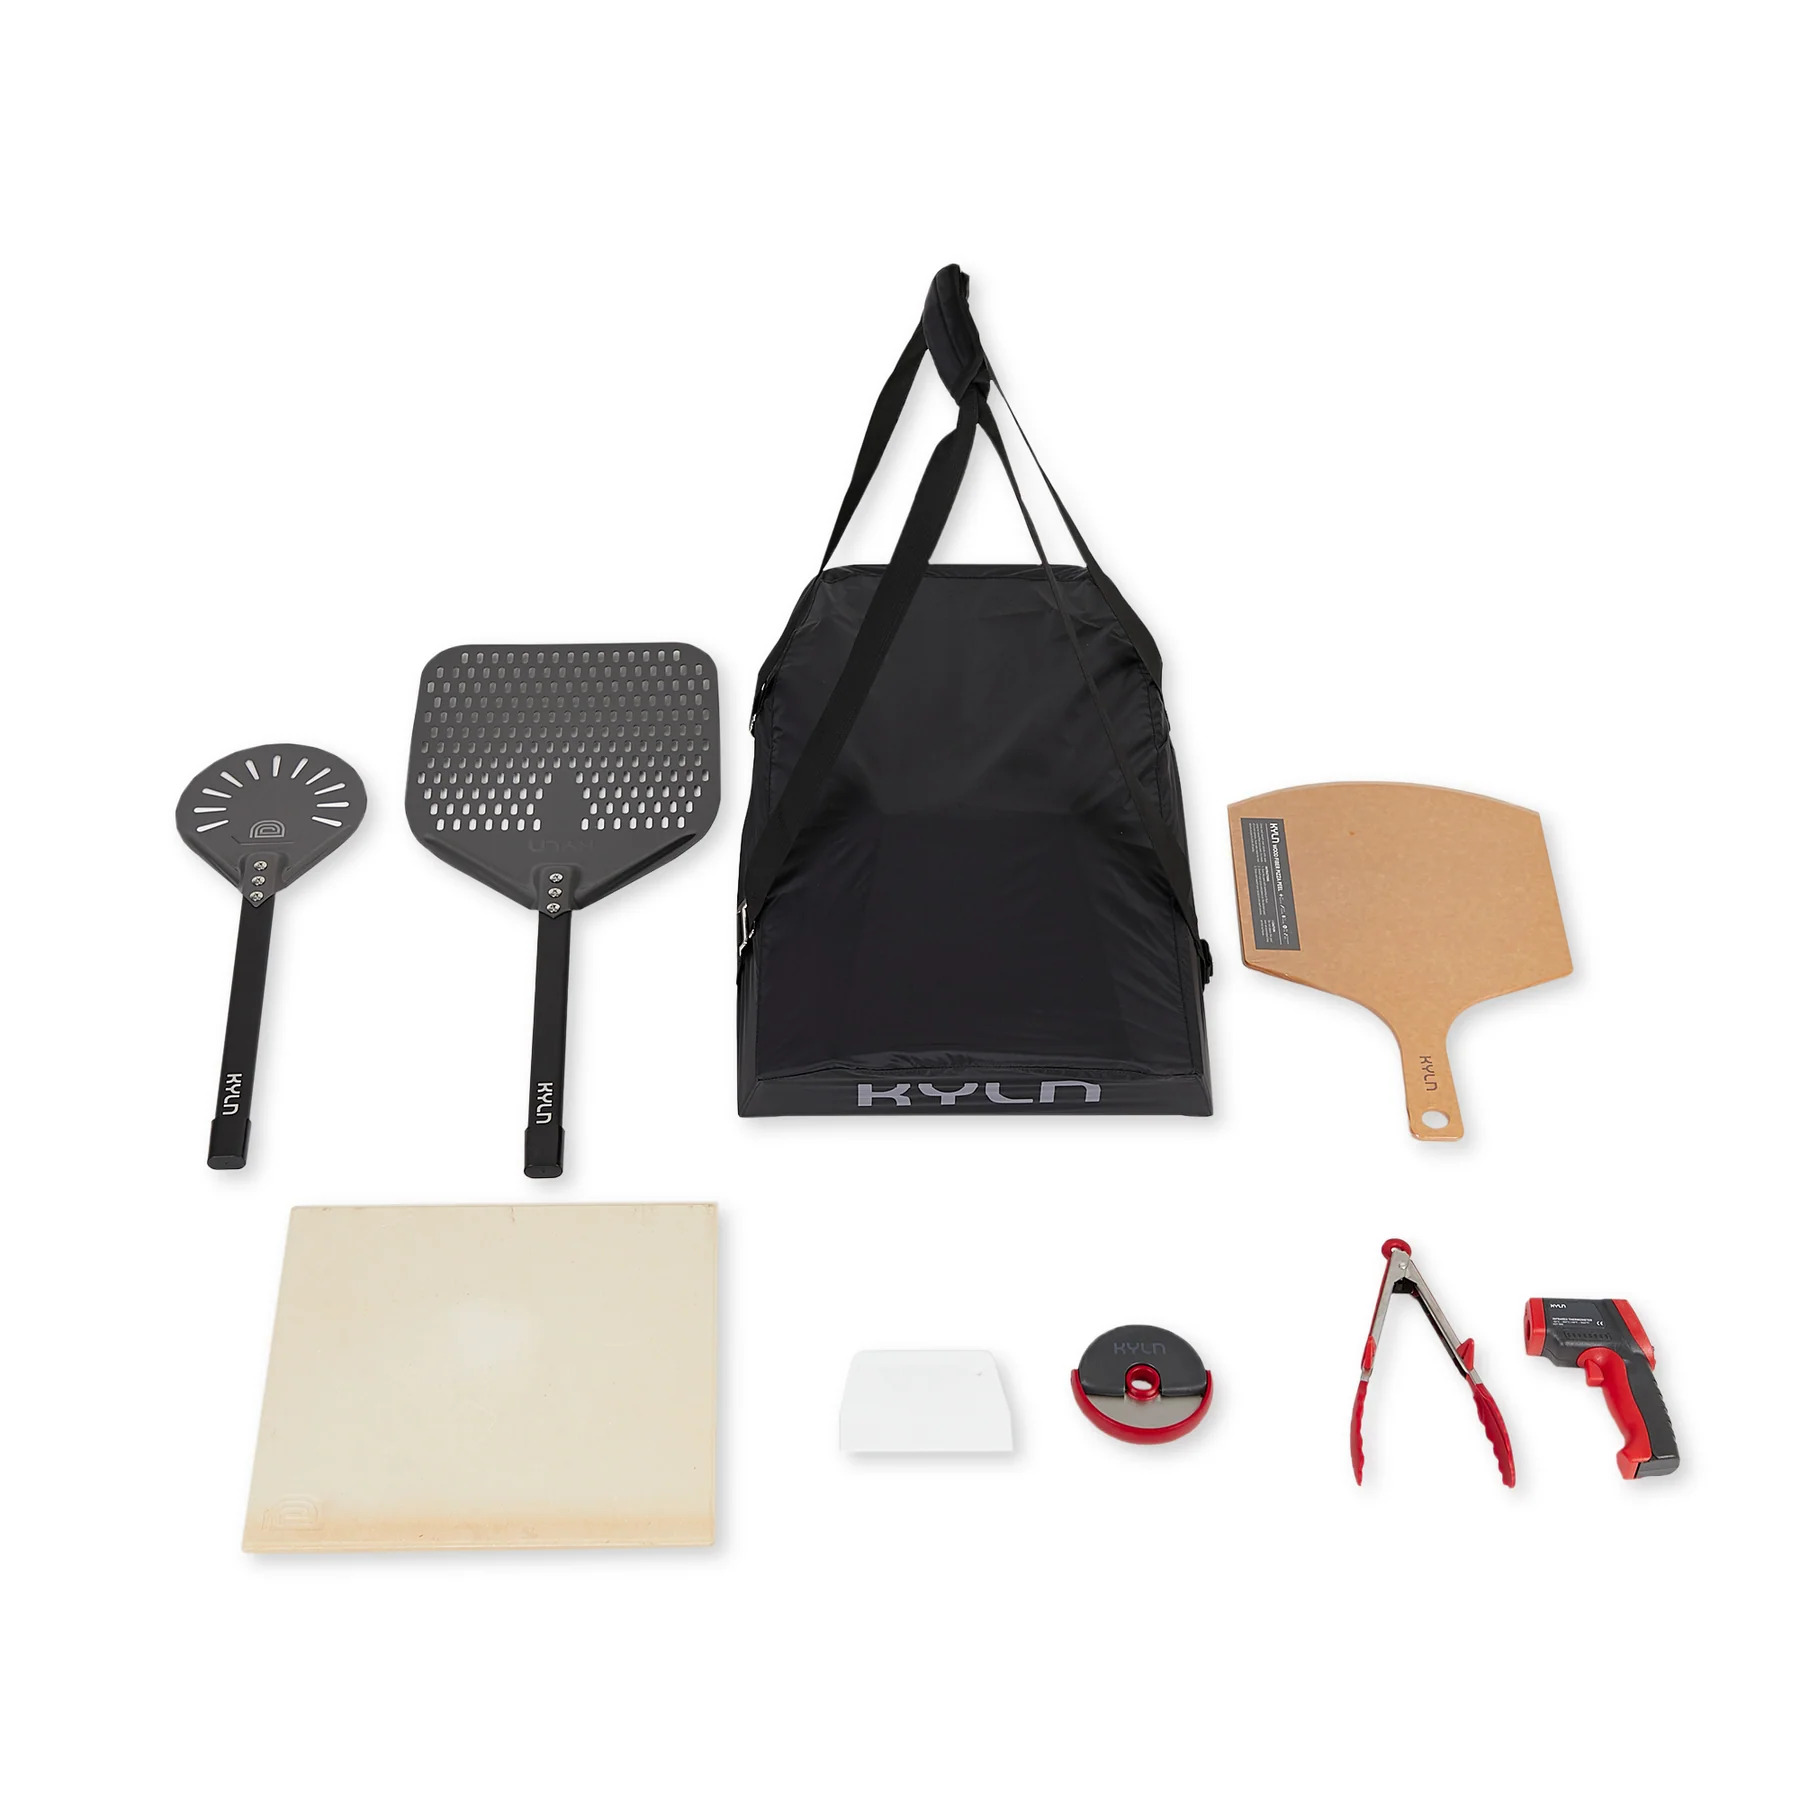 The Kyln Pro Pack comes with an additional set of tools to complete the cooking experience